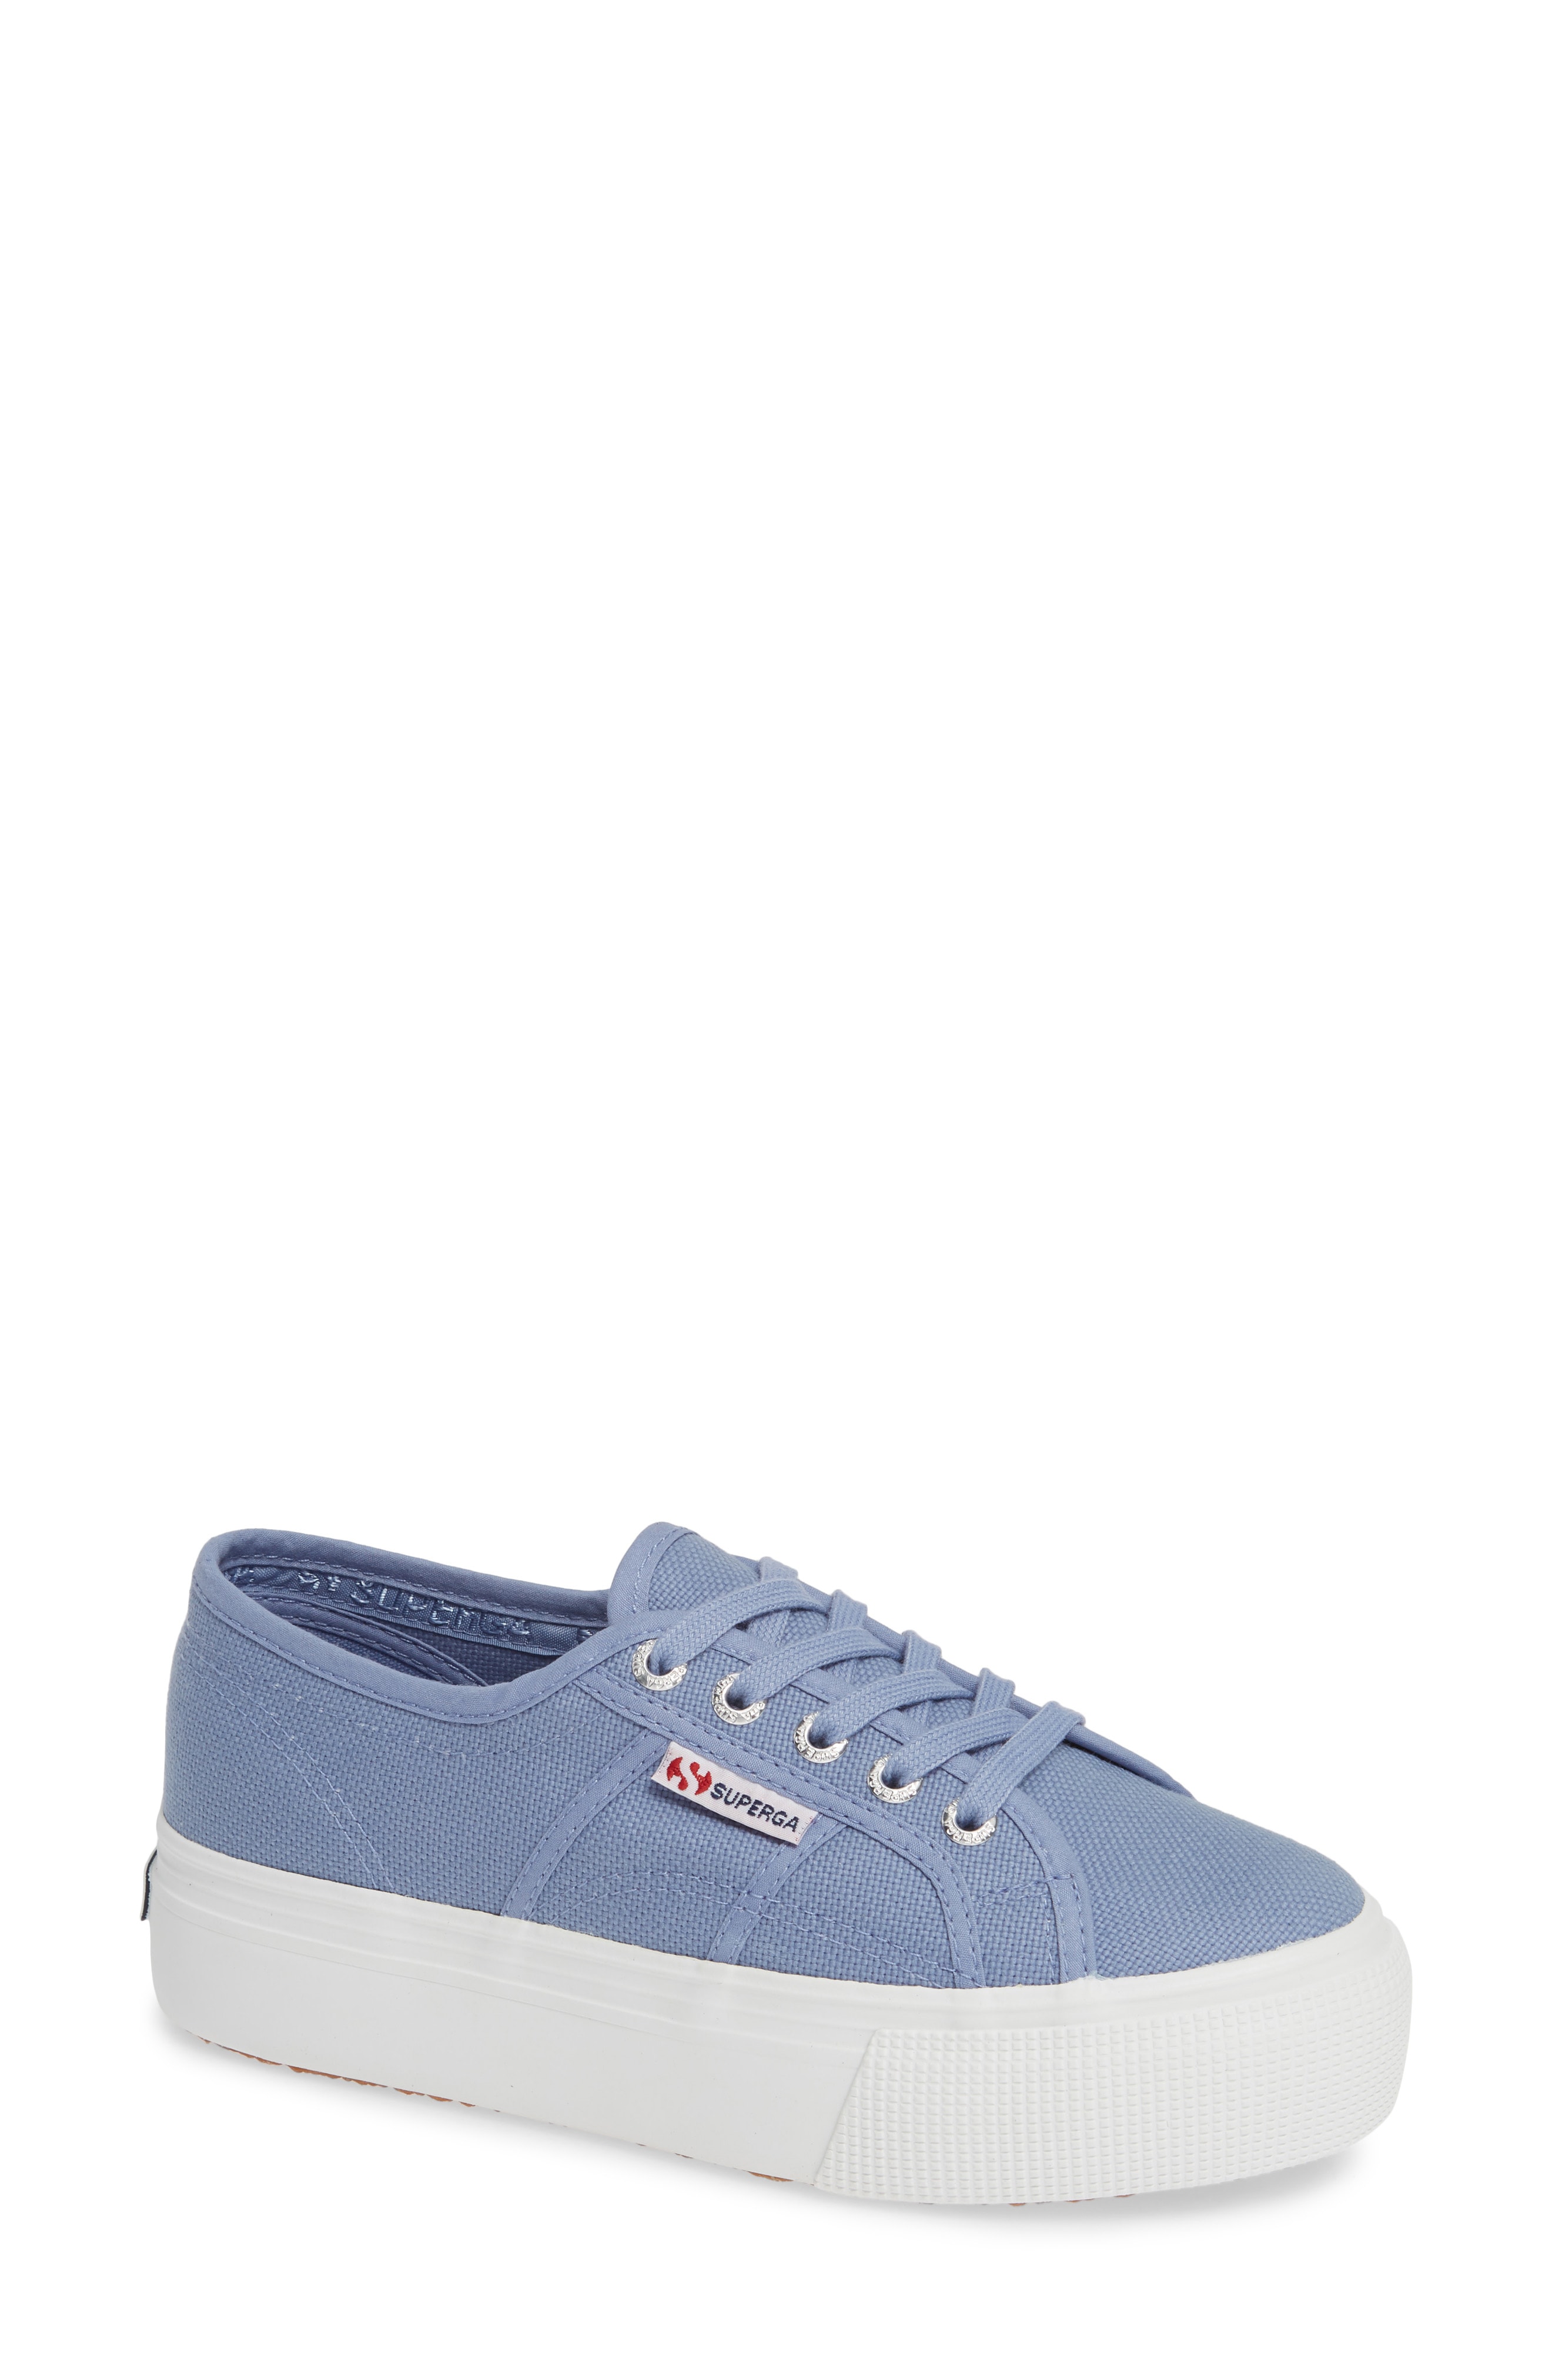 Superga Shoes -Sneakers and more